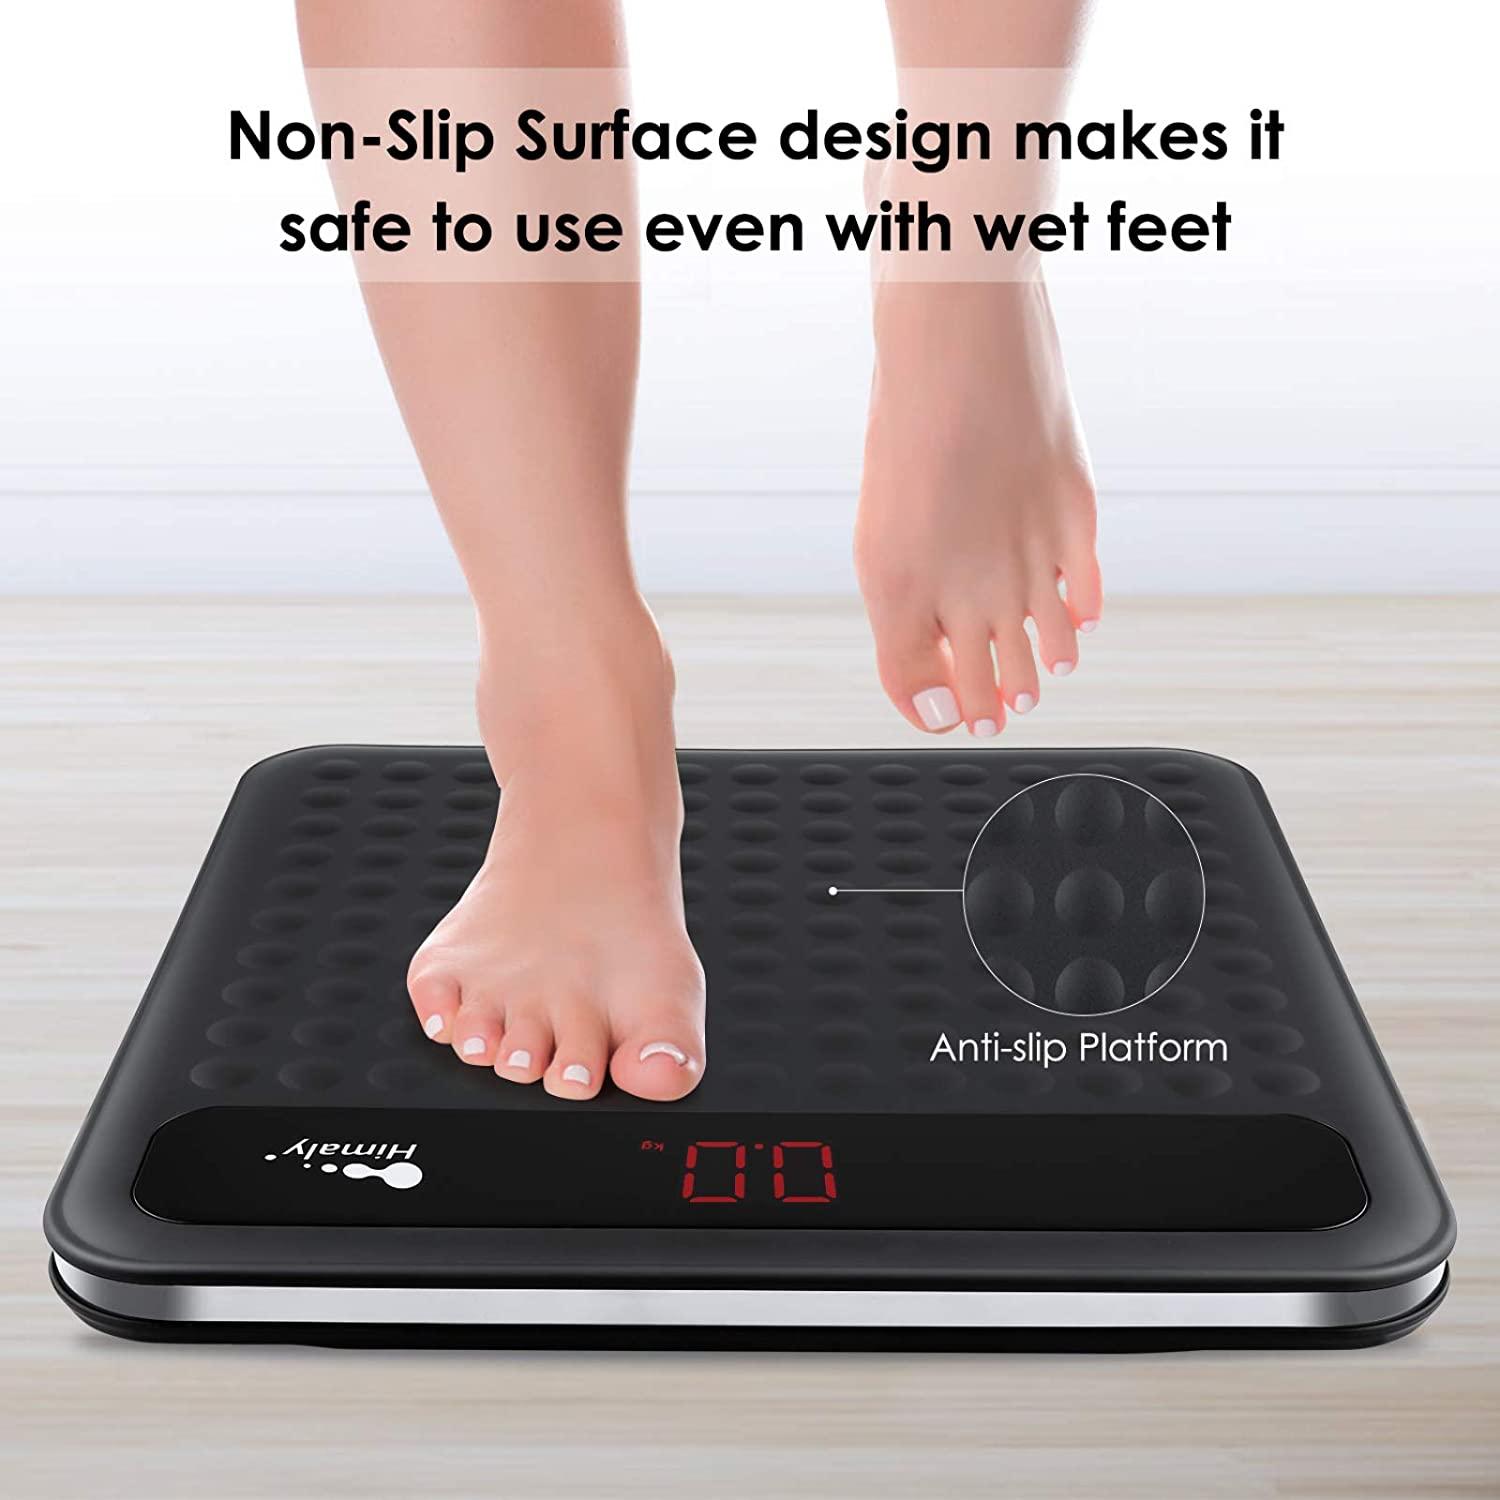 Digital Scale for Body Weight Precision Bathroom Weighing Bath Scale Step-On Technology High Capacity 400 lbs.